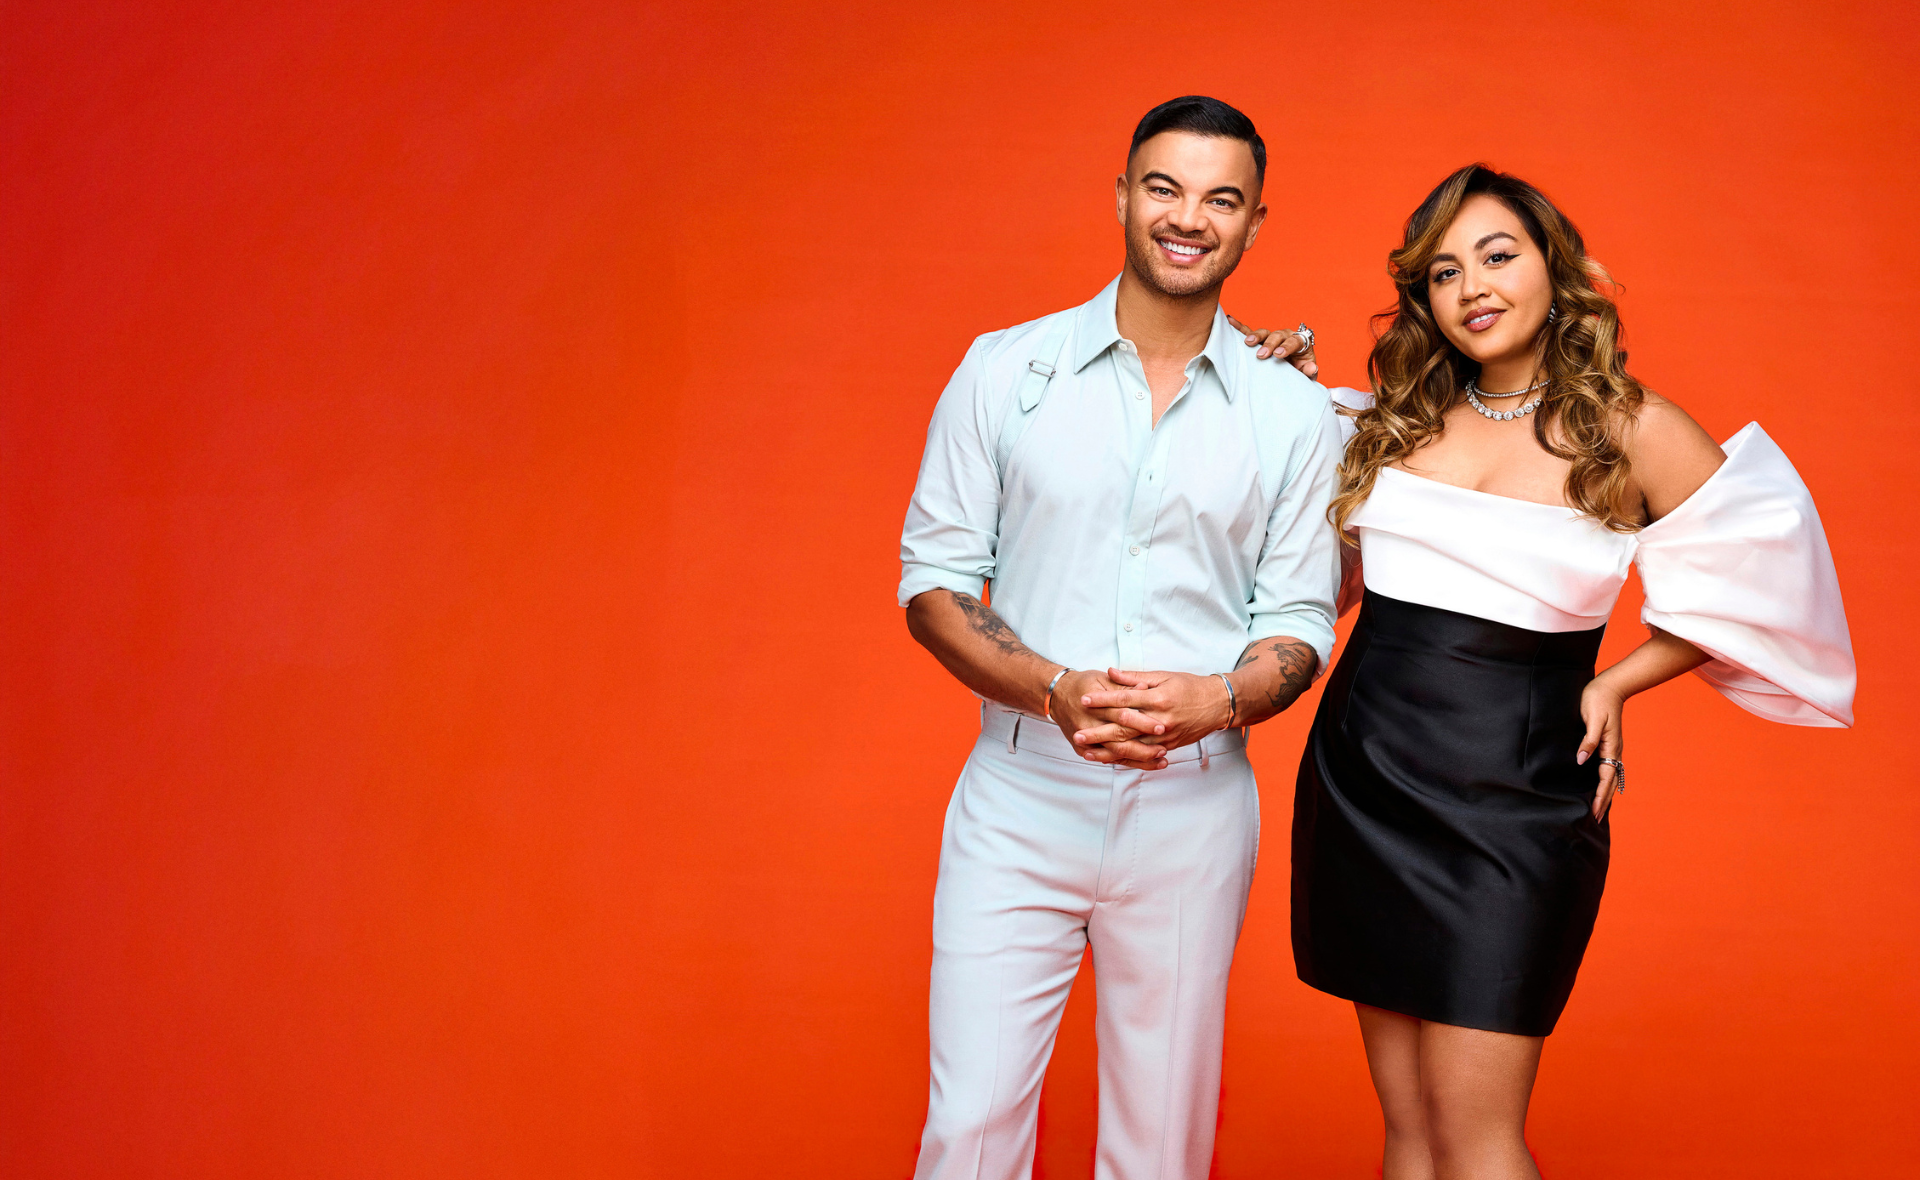 The Voice Australia’s Guy Sebastian and Jessica Mauboy talk auditions, ageing and staying grounded